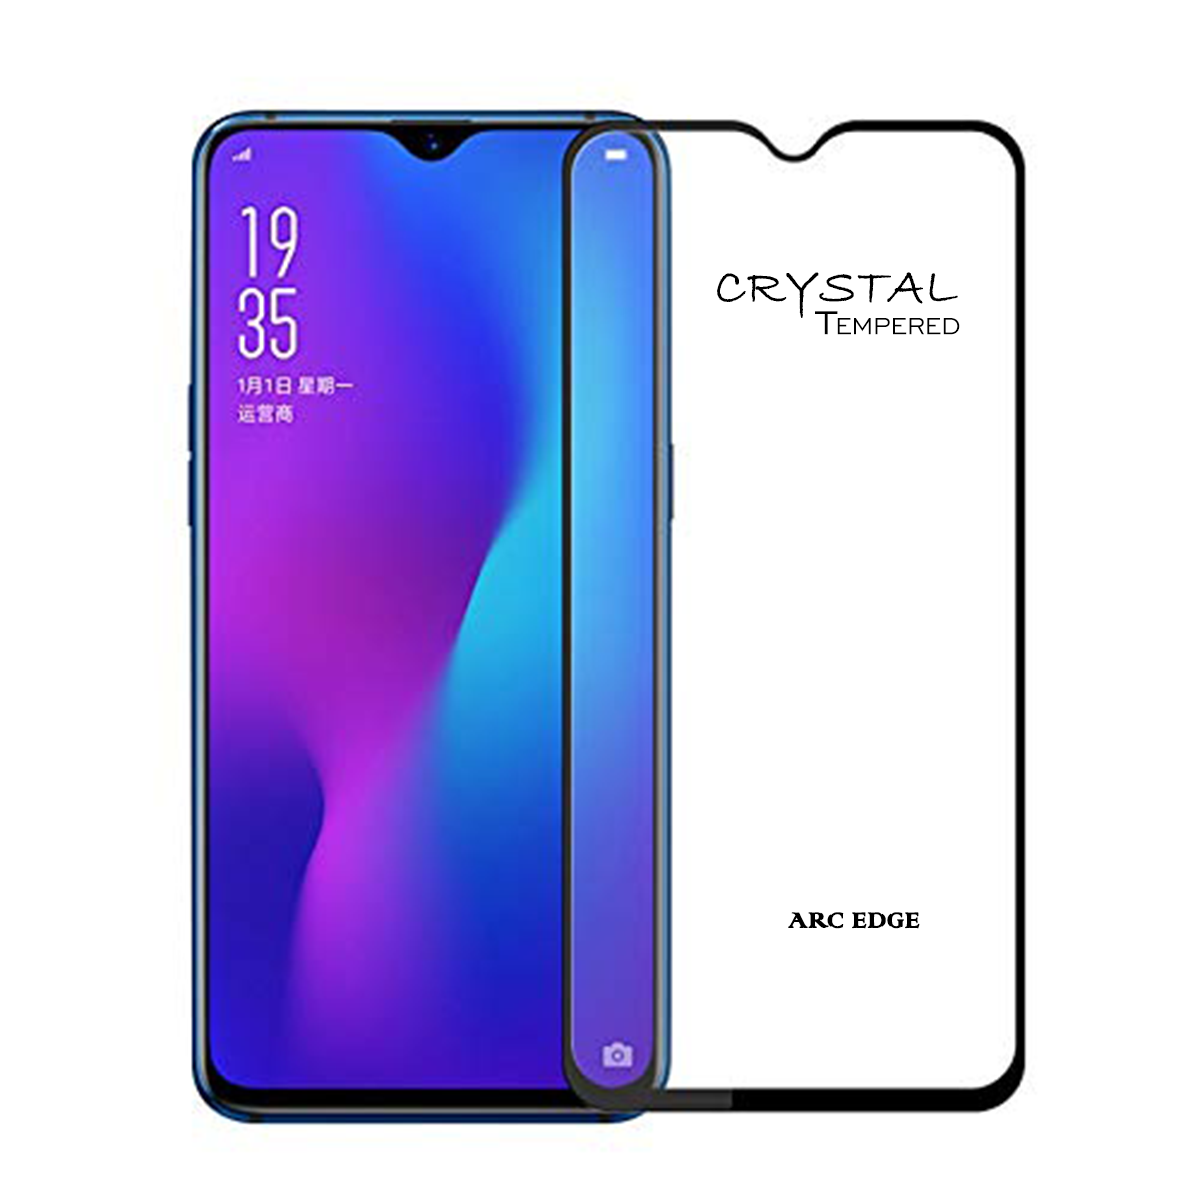 iFix Crystal 5D Tempered Glass for OPPO K1/R17/RX17 PRO/RX17 NEO/REALME X2/XT